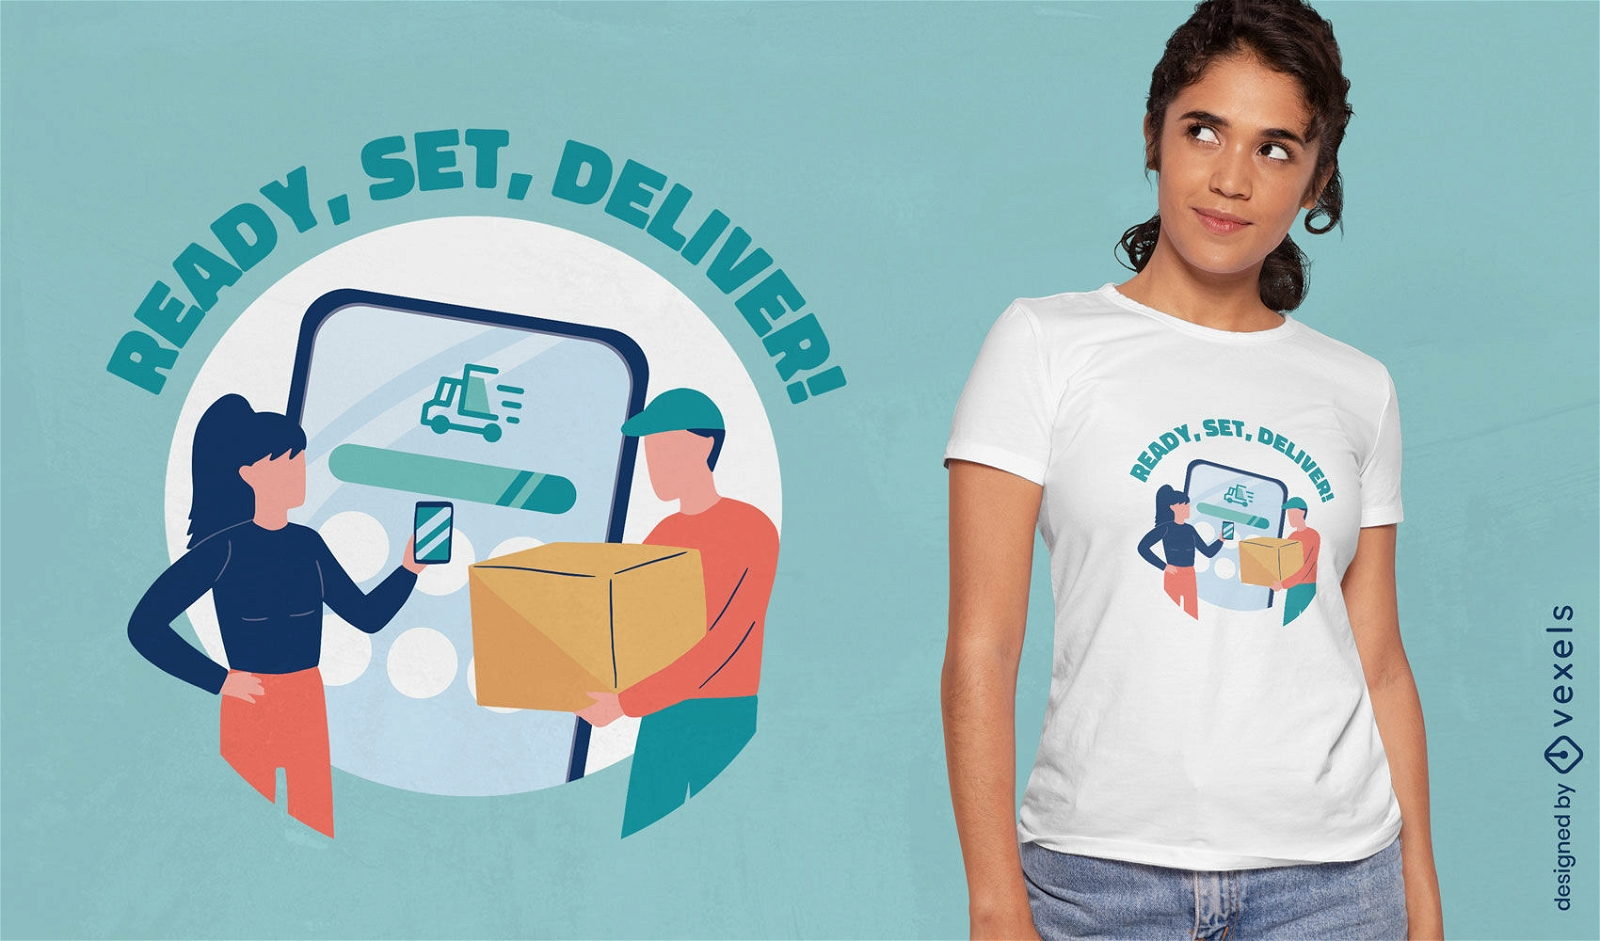 Delivery business quote t-shirt design